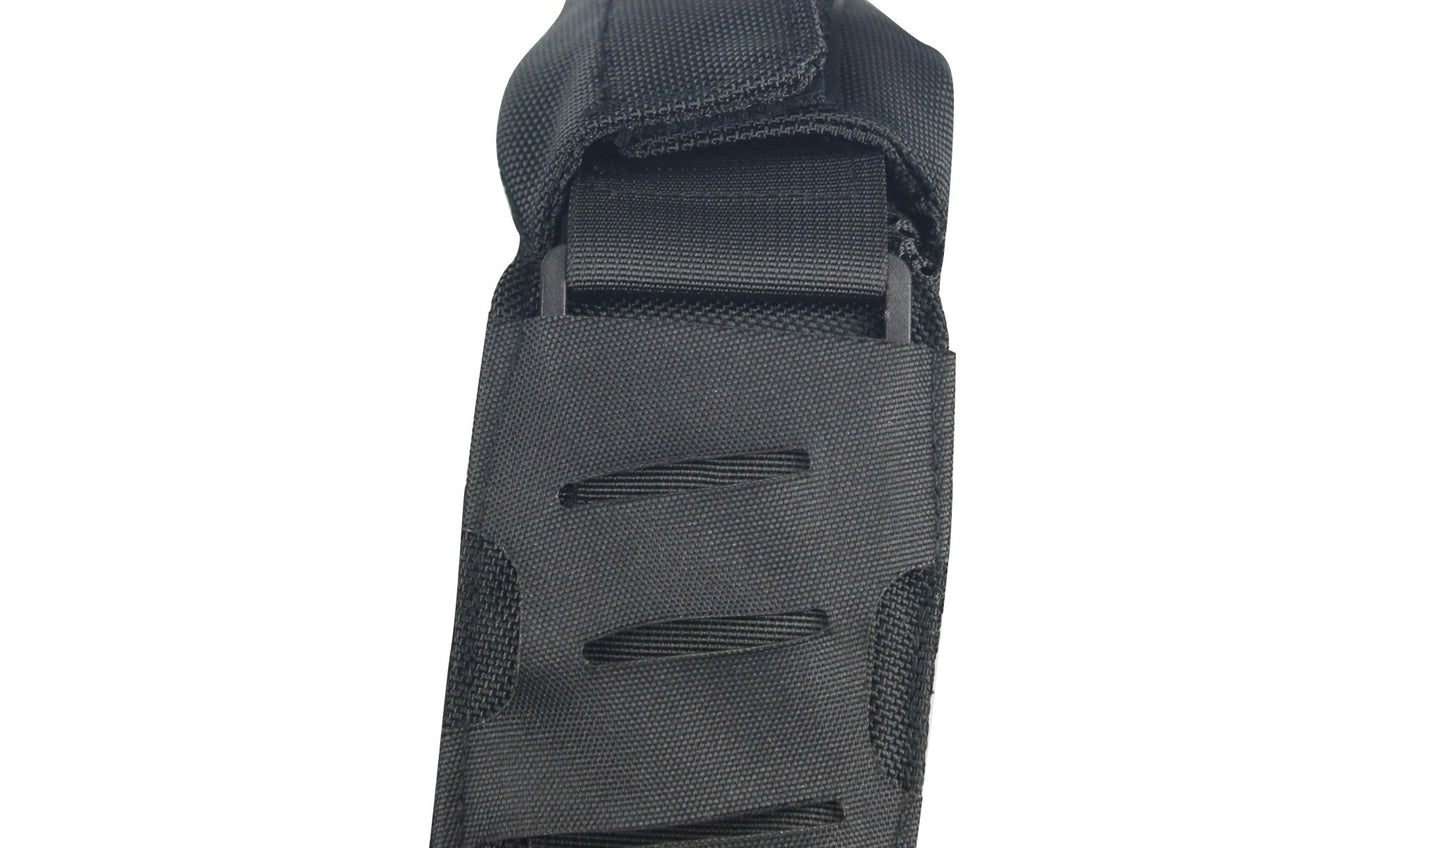 GTS FIREFIGHT Plate Carrier - Gilliam Technical Services, Inc.